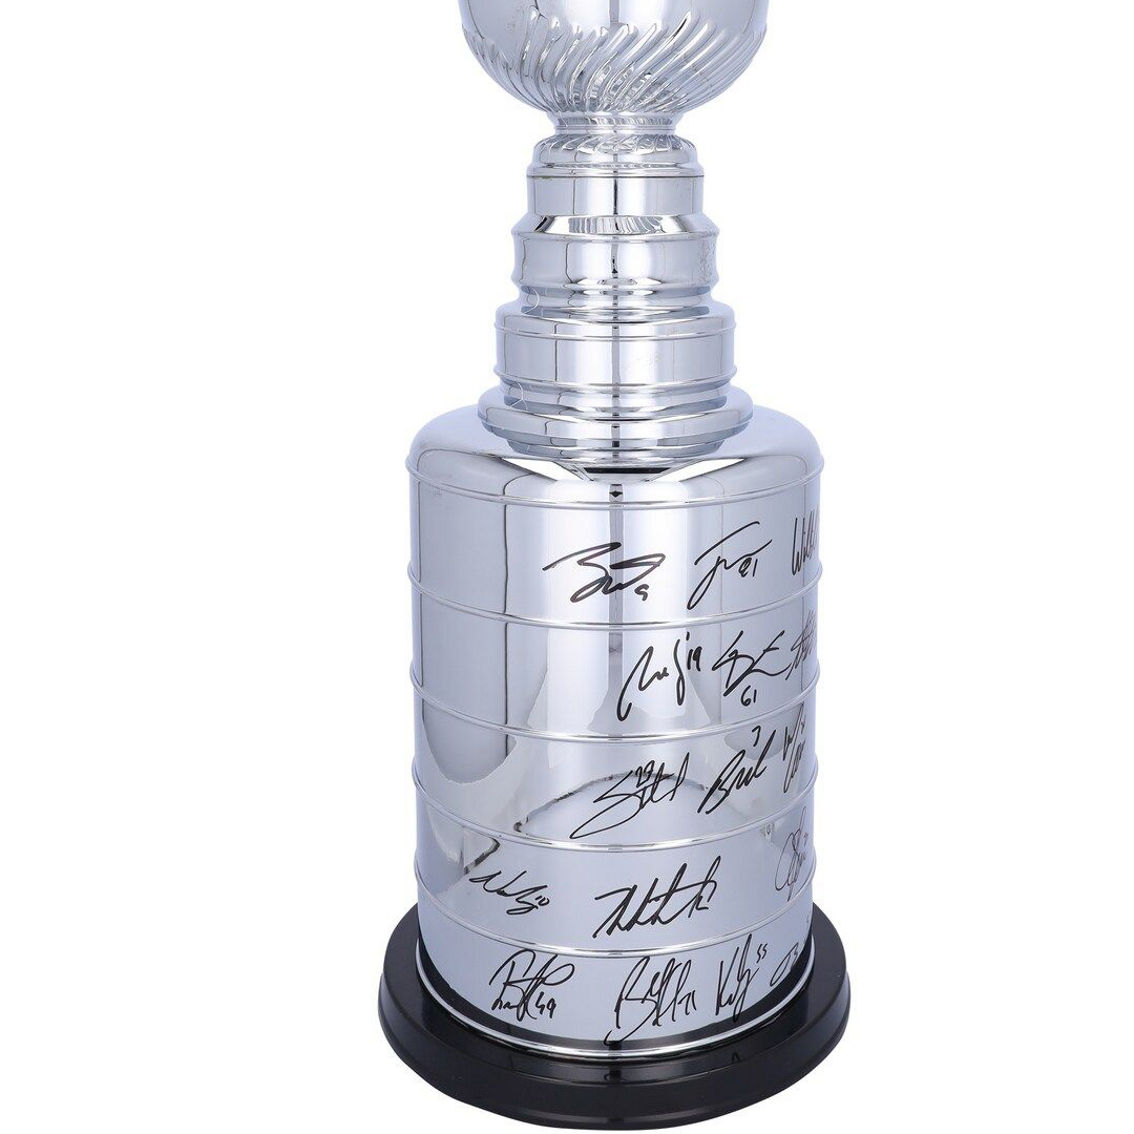 Fanatics Authentic Vegas Golden Knights Multi-Signed 2023 Stanley Cup s 2' Replica Stanley Cup with Multiple Signatures - Limited Edition of 75 - Image 3 of 4